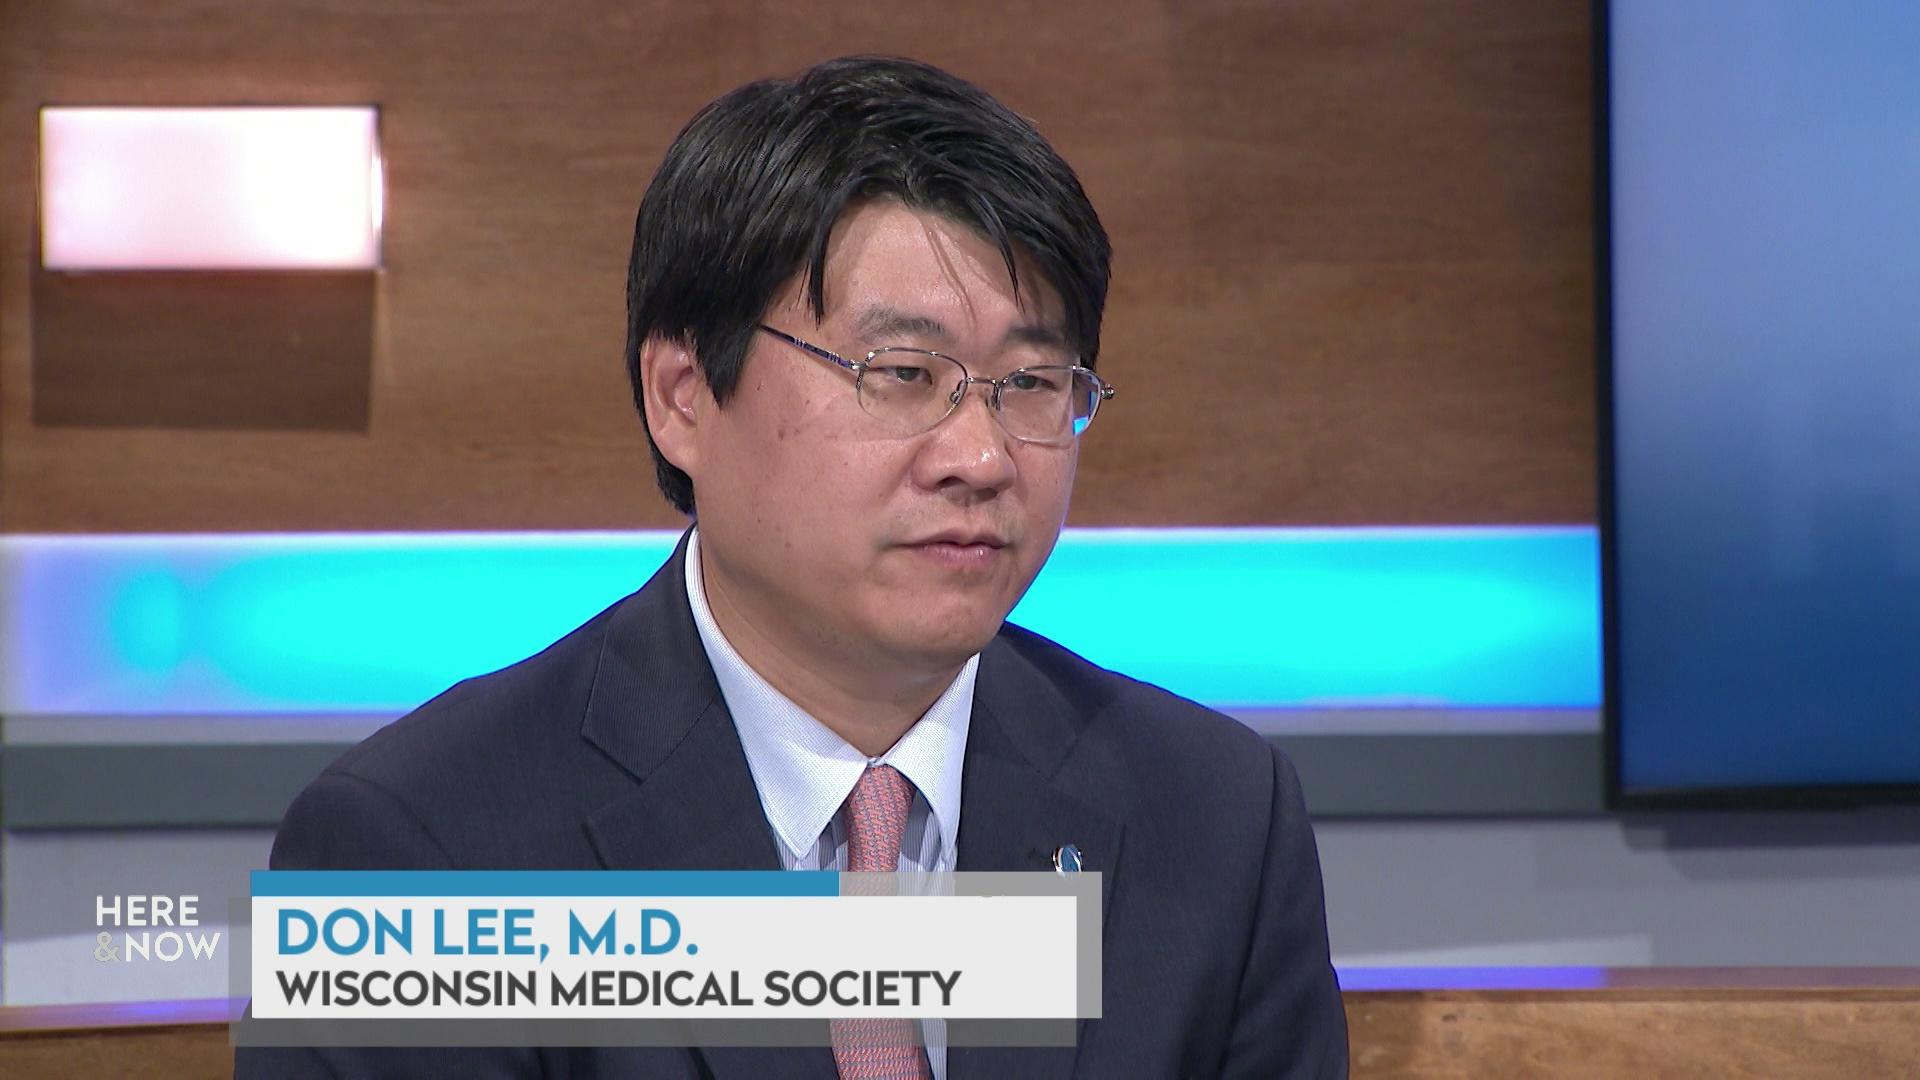 A still image shows Don Lee seated at the 'Here & Now' set featuring wood paneling, with a graphic at bottom reading 'Don Lee' and 'Wisconsin Medical Society.'